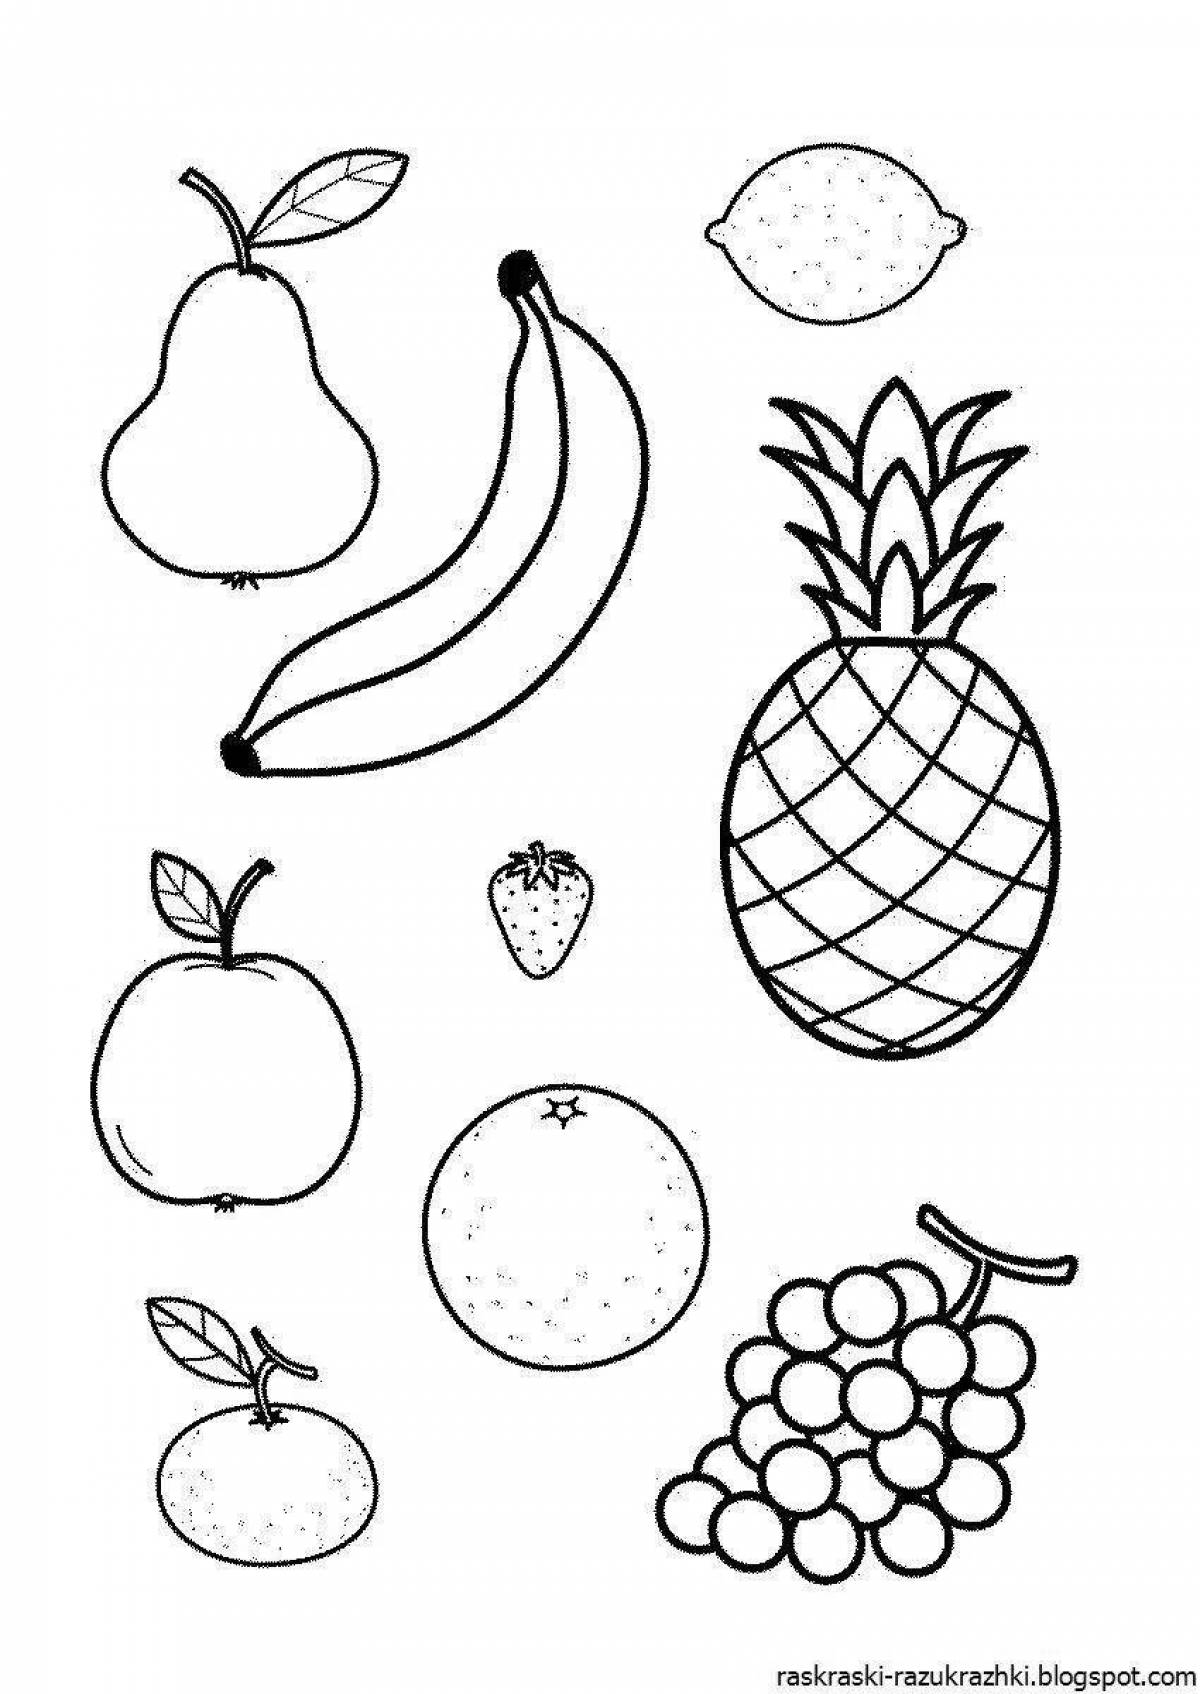 Fabulous berries and fruits coloring for kids